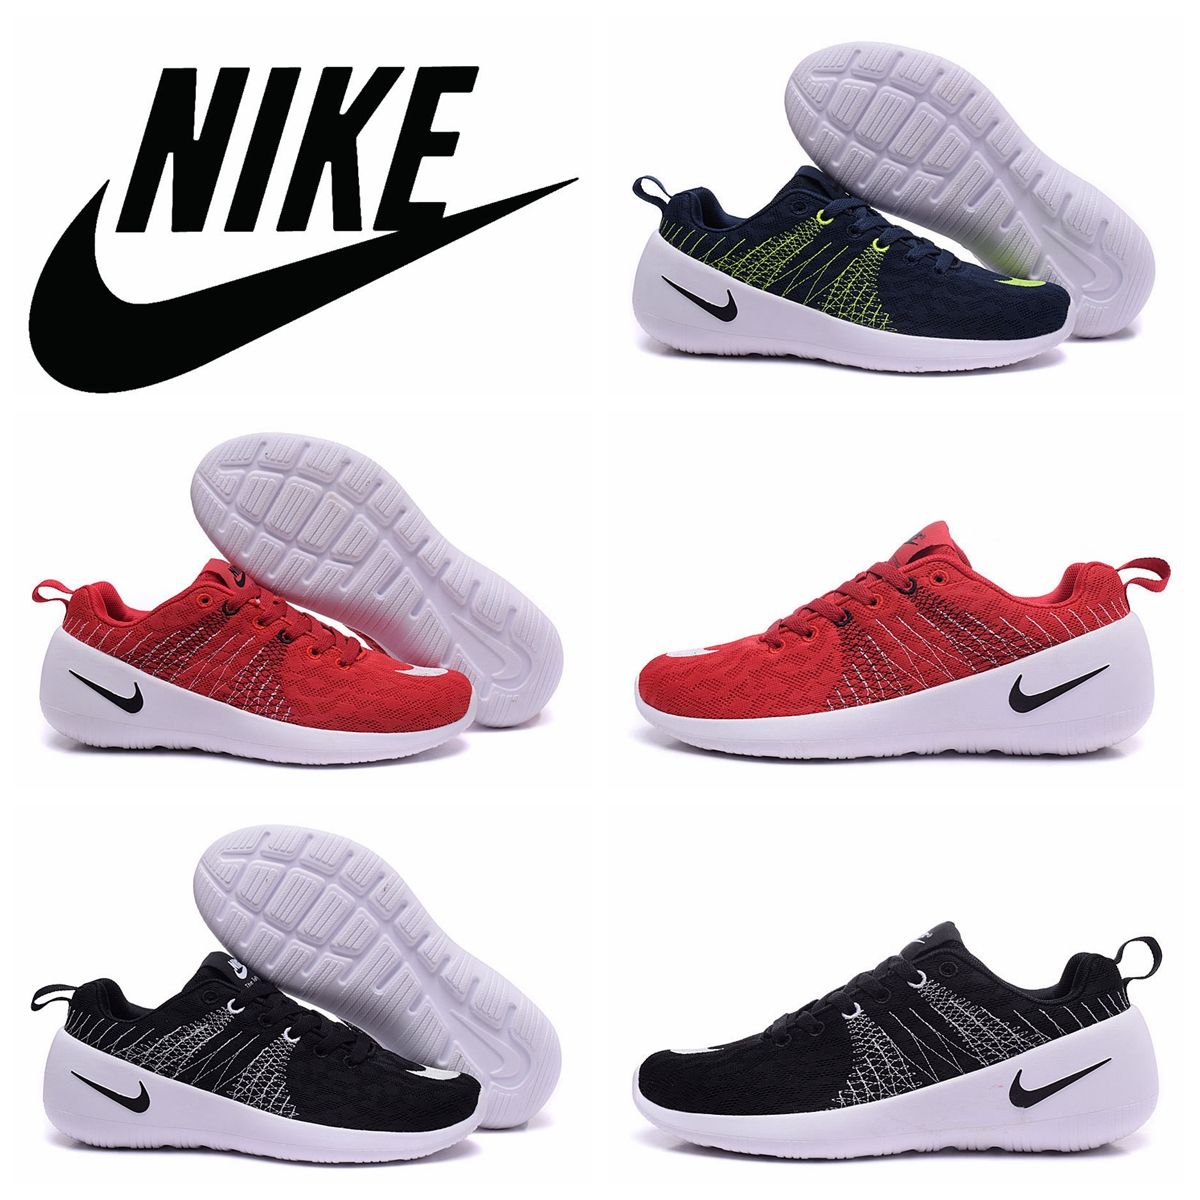 New Arrival 2016 Nike Top Running Men Sport Shoes Eur Size 40 44 ...